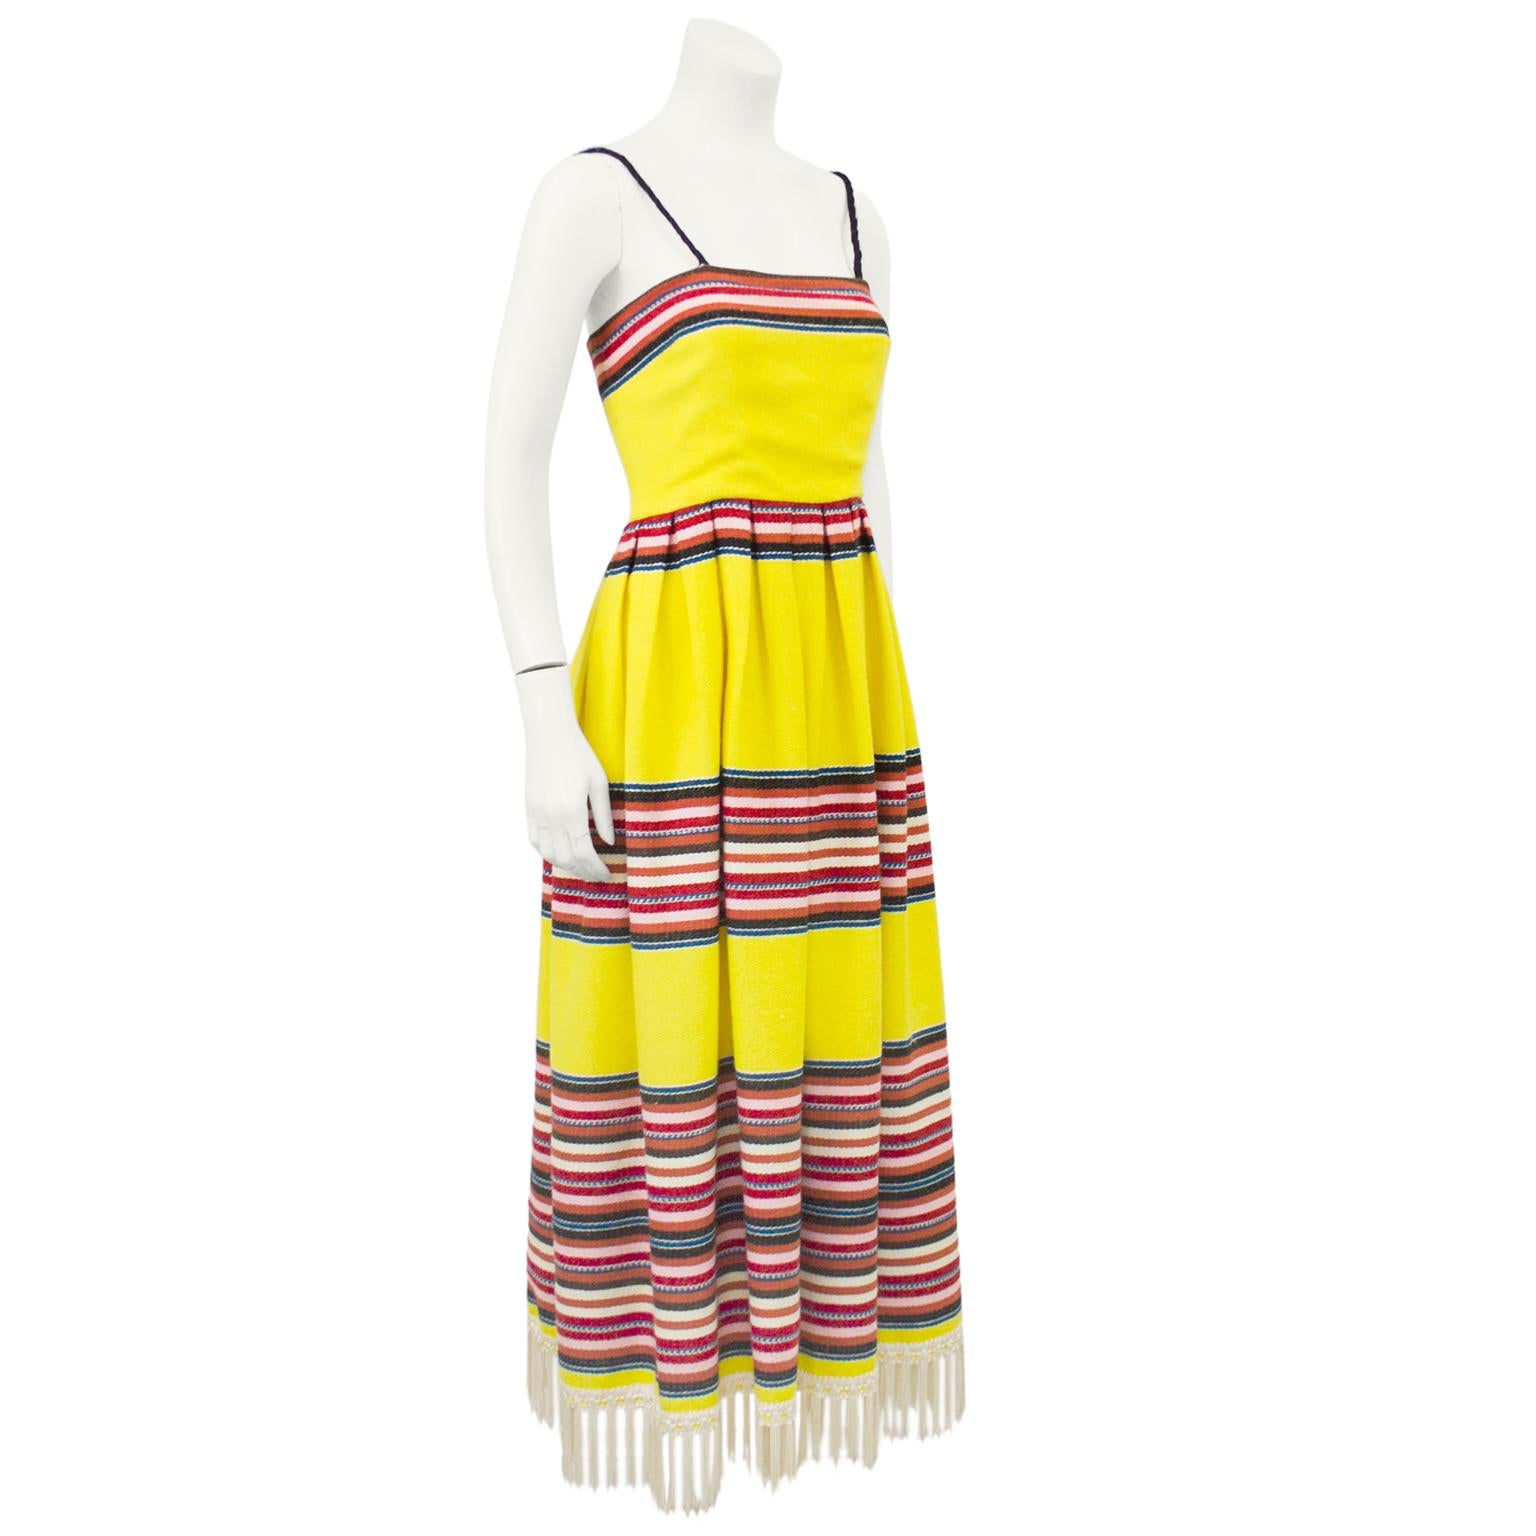 1970s yellow wool blend day gown from the designer Albert Capraro. The pattern on the dress resembles a traditional Mexican blanket with navy, pink and white horizontal stripes along the top of the bust, waist, hips and a large section at the hem.